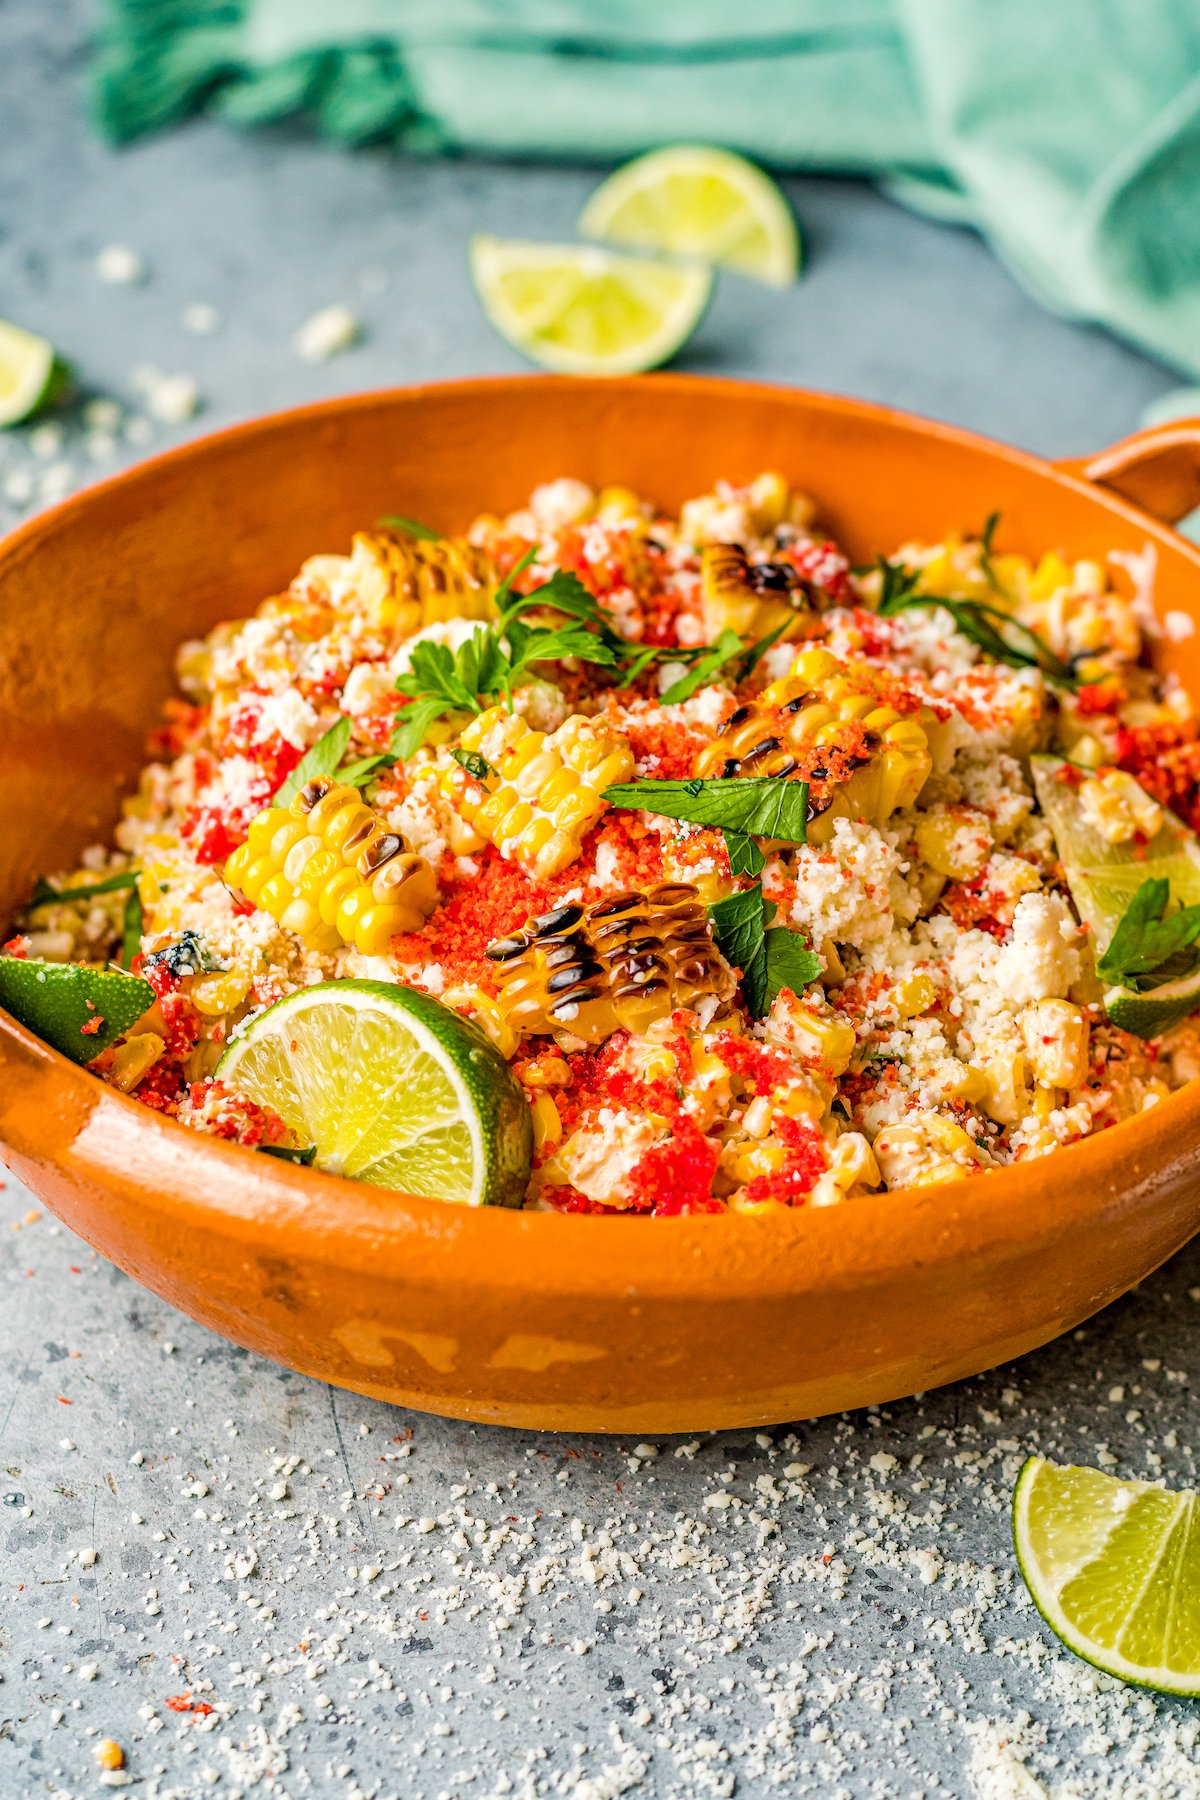 A large bowl of elote corn salad.